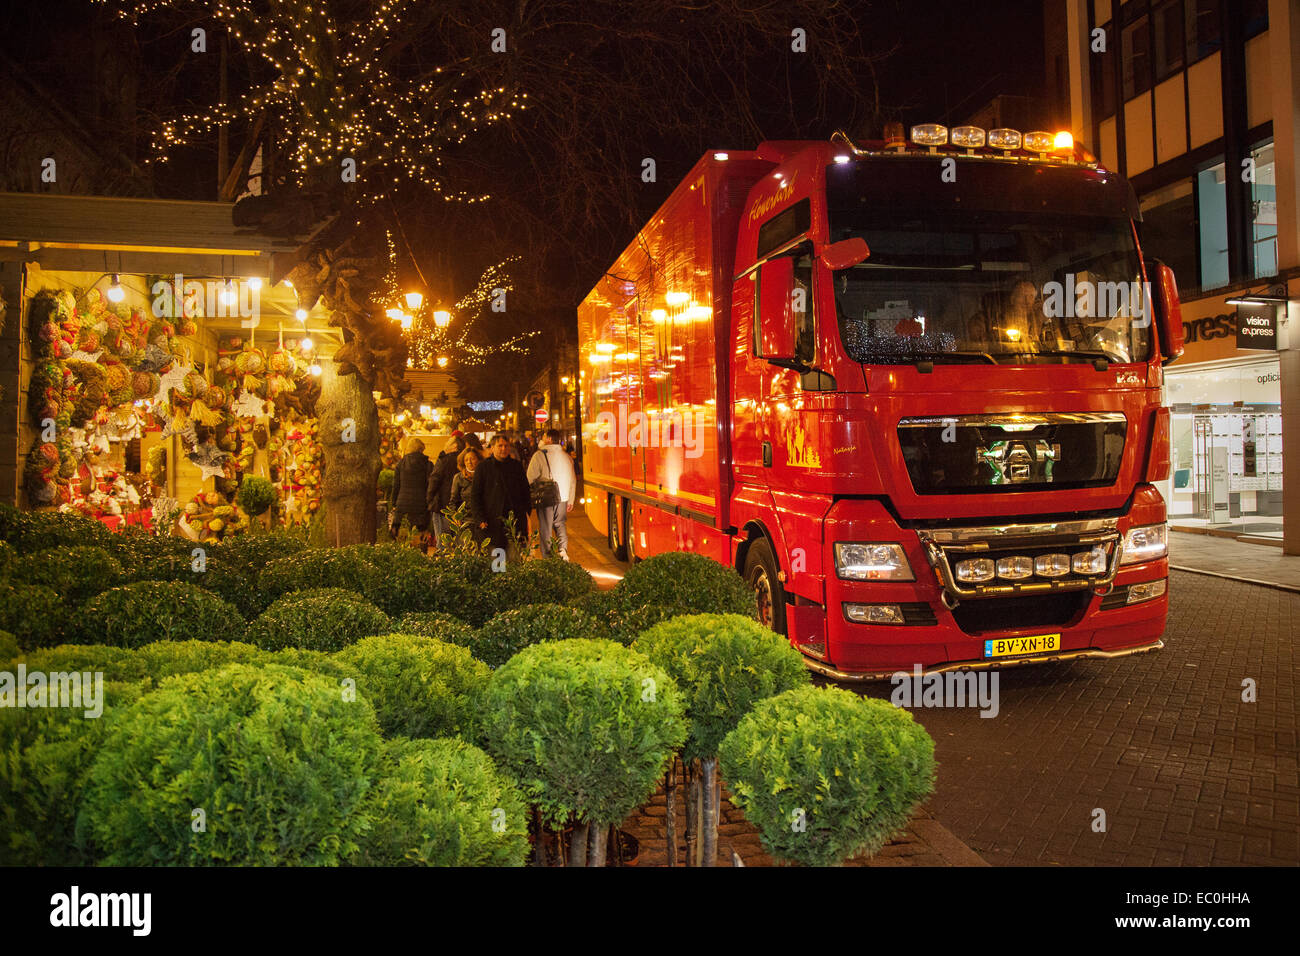 Dutch bulbs; MAN Red Delivery Vehicles 'Holland Flower Market' delivering plants, bulbs & festive goods to Chester Christmas Market, Cheshire, UK Stock Photo